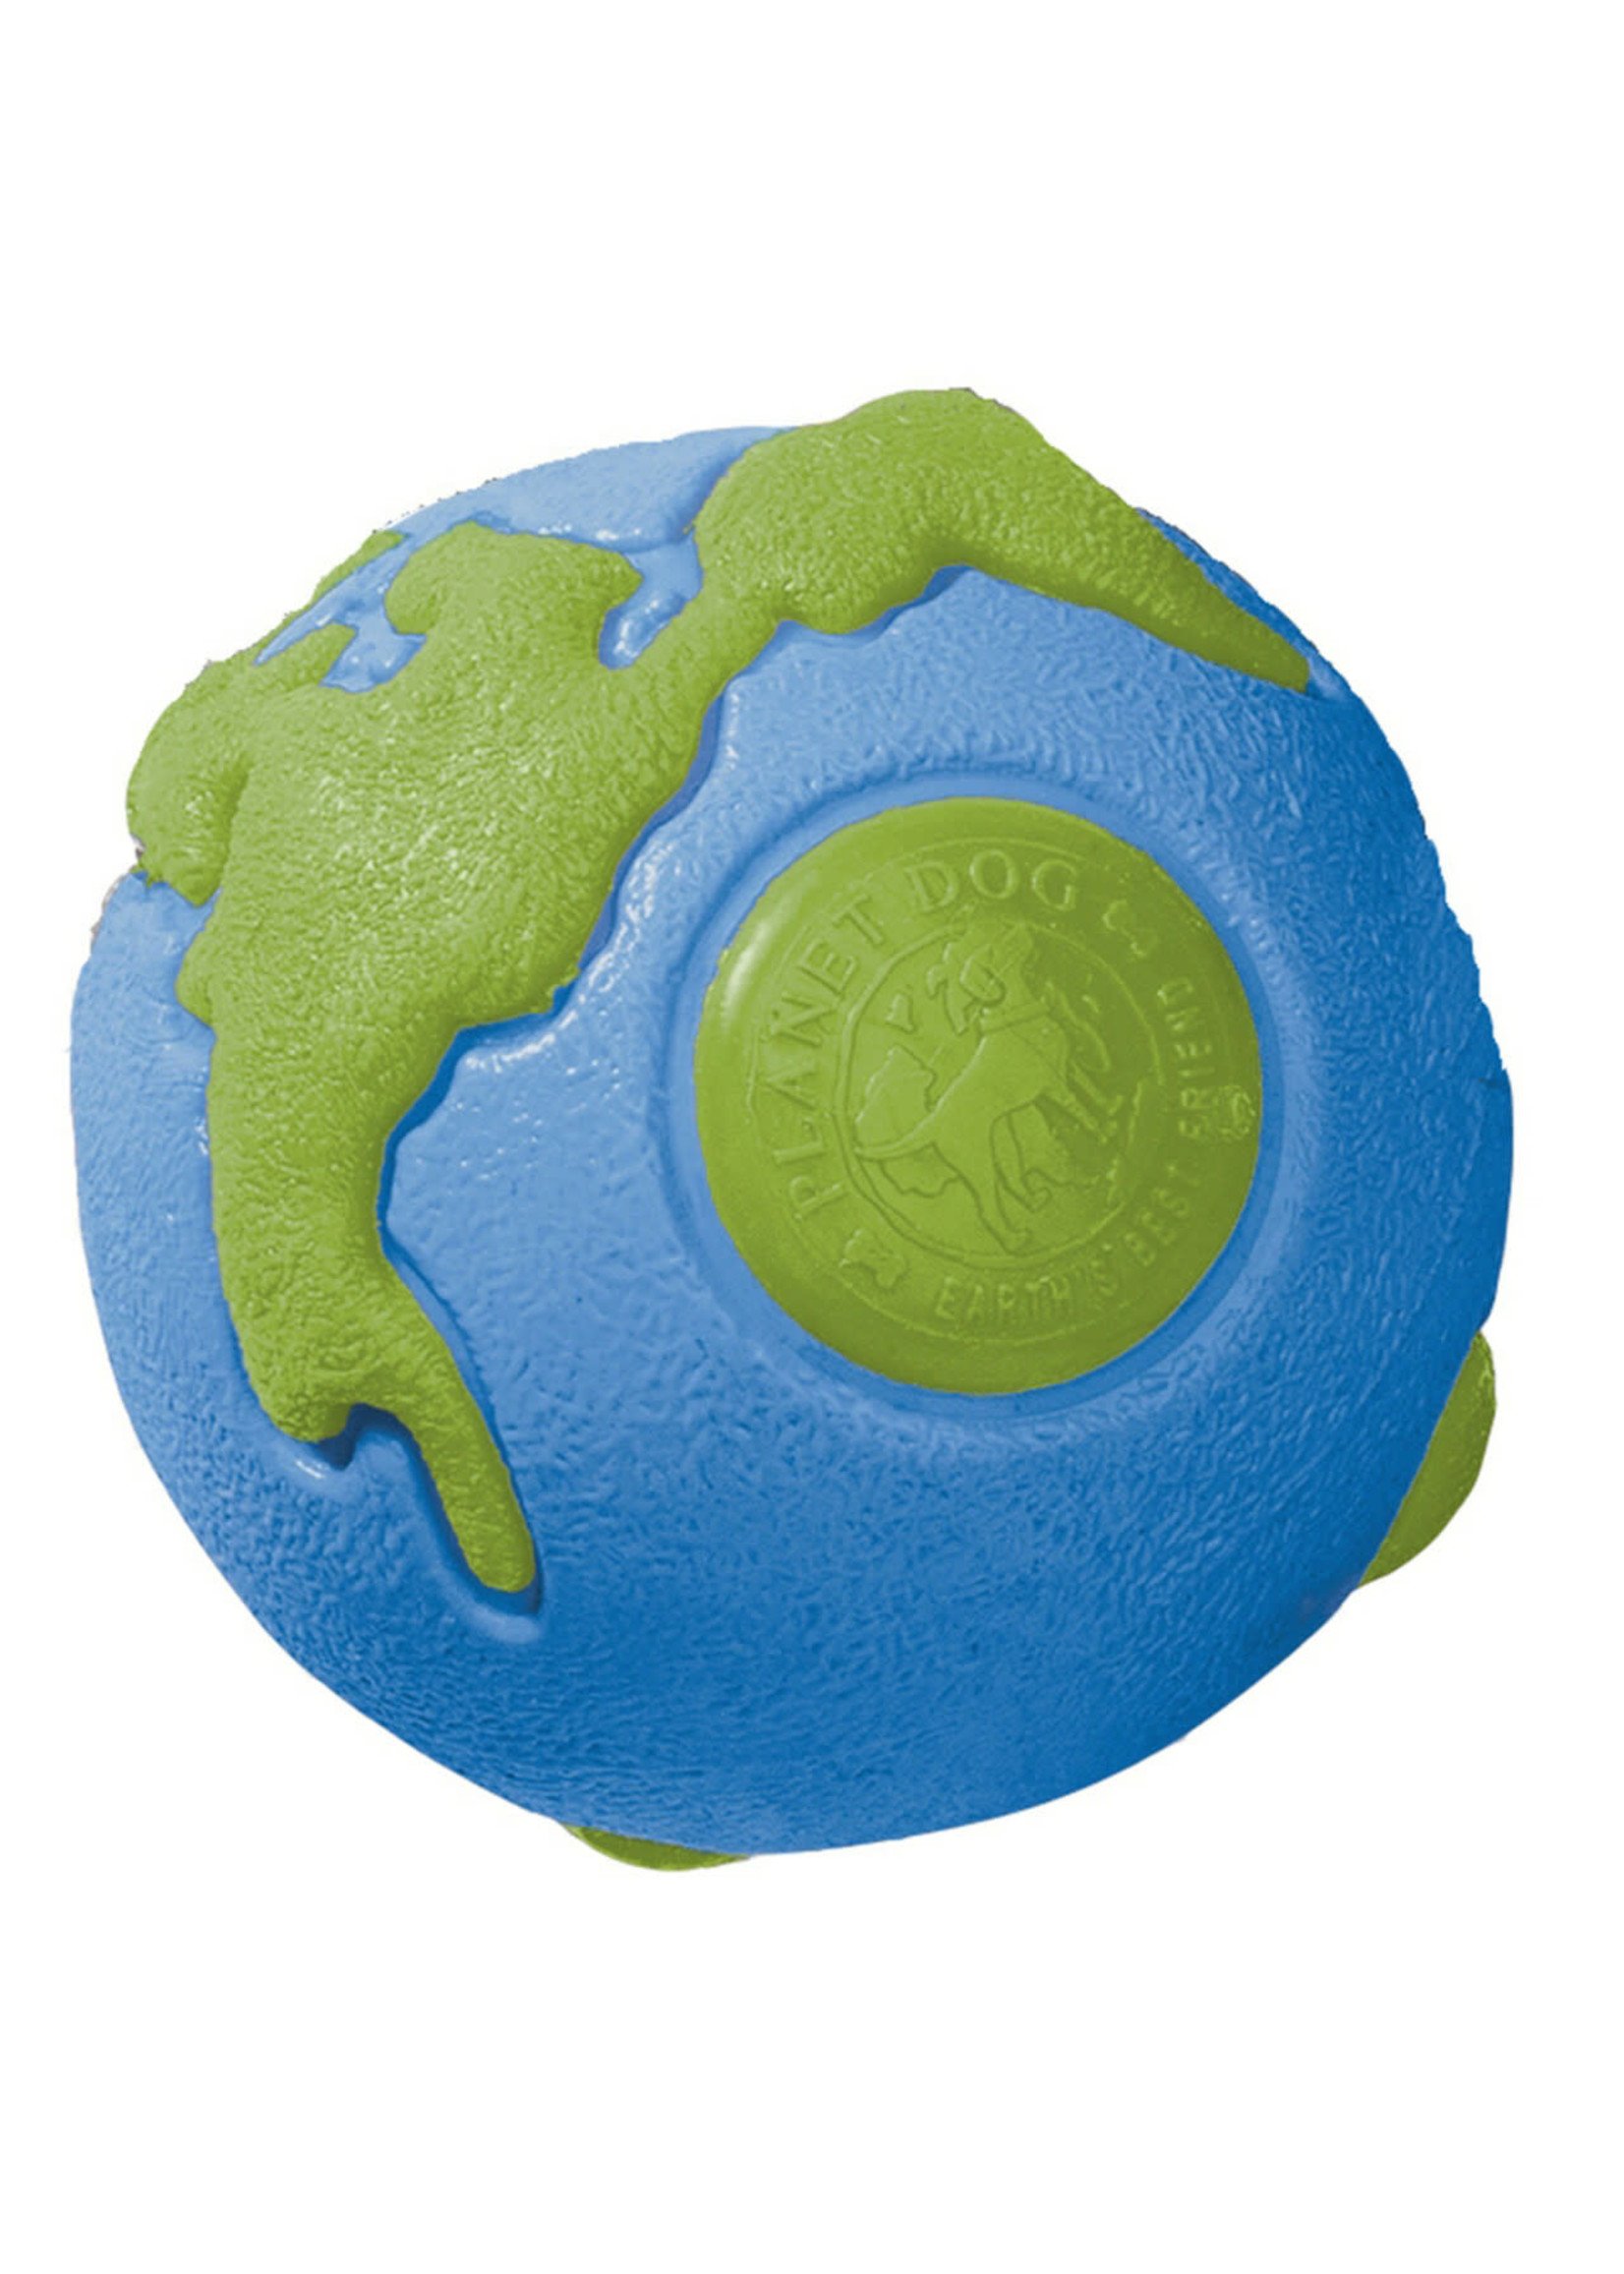 Planet Dog Orbee-Tuff Planet Ball Large Blue/Green